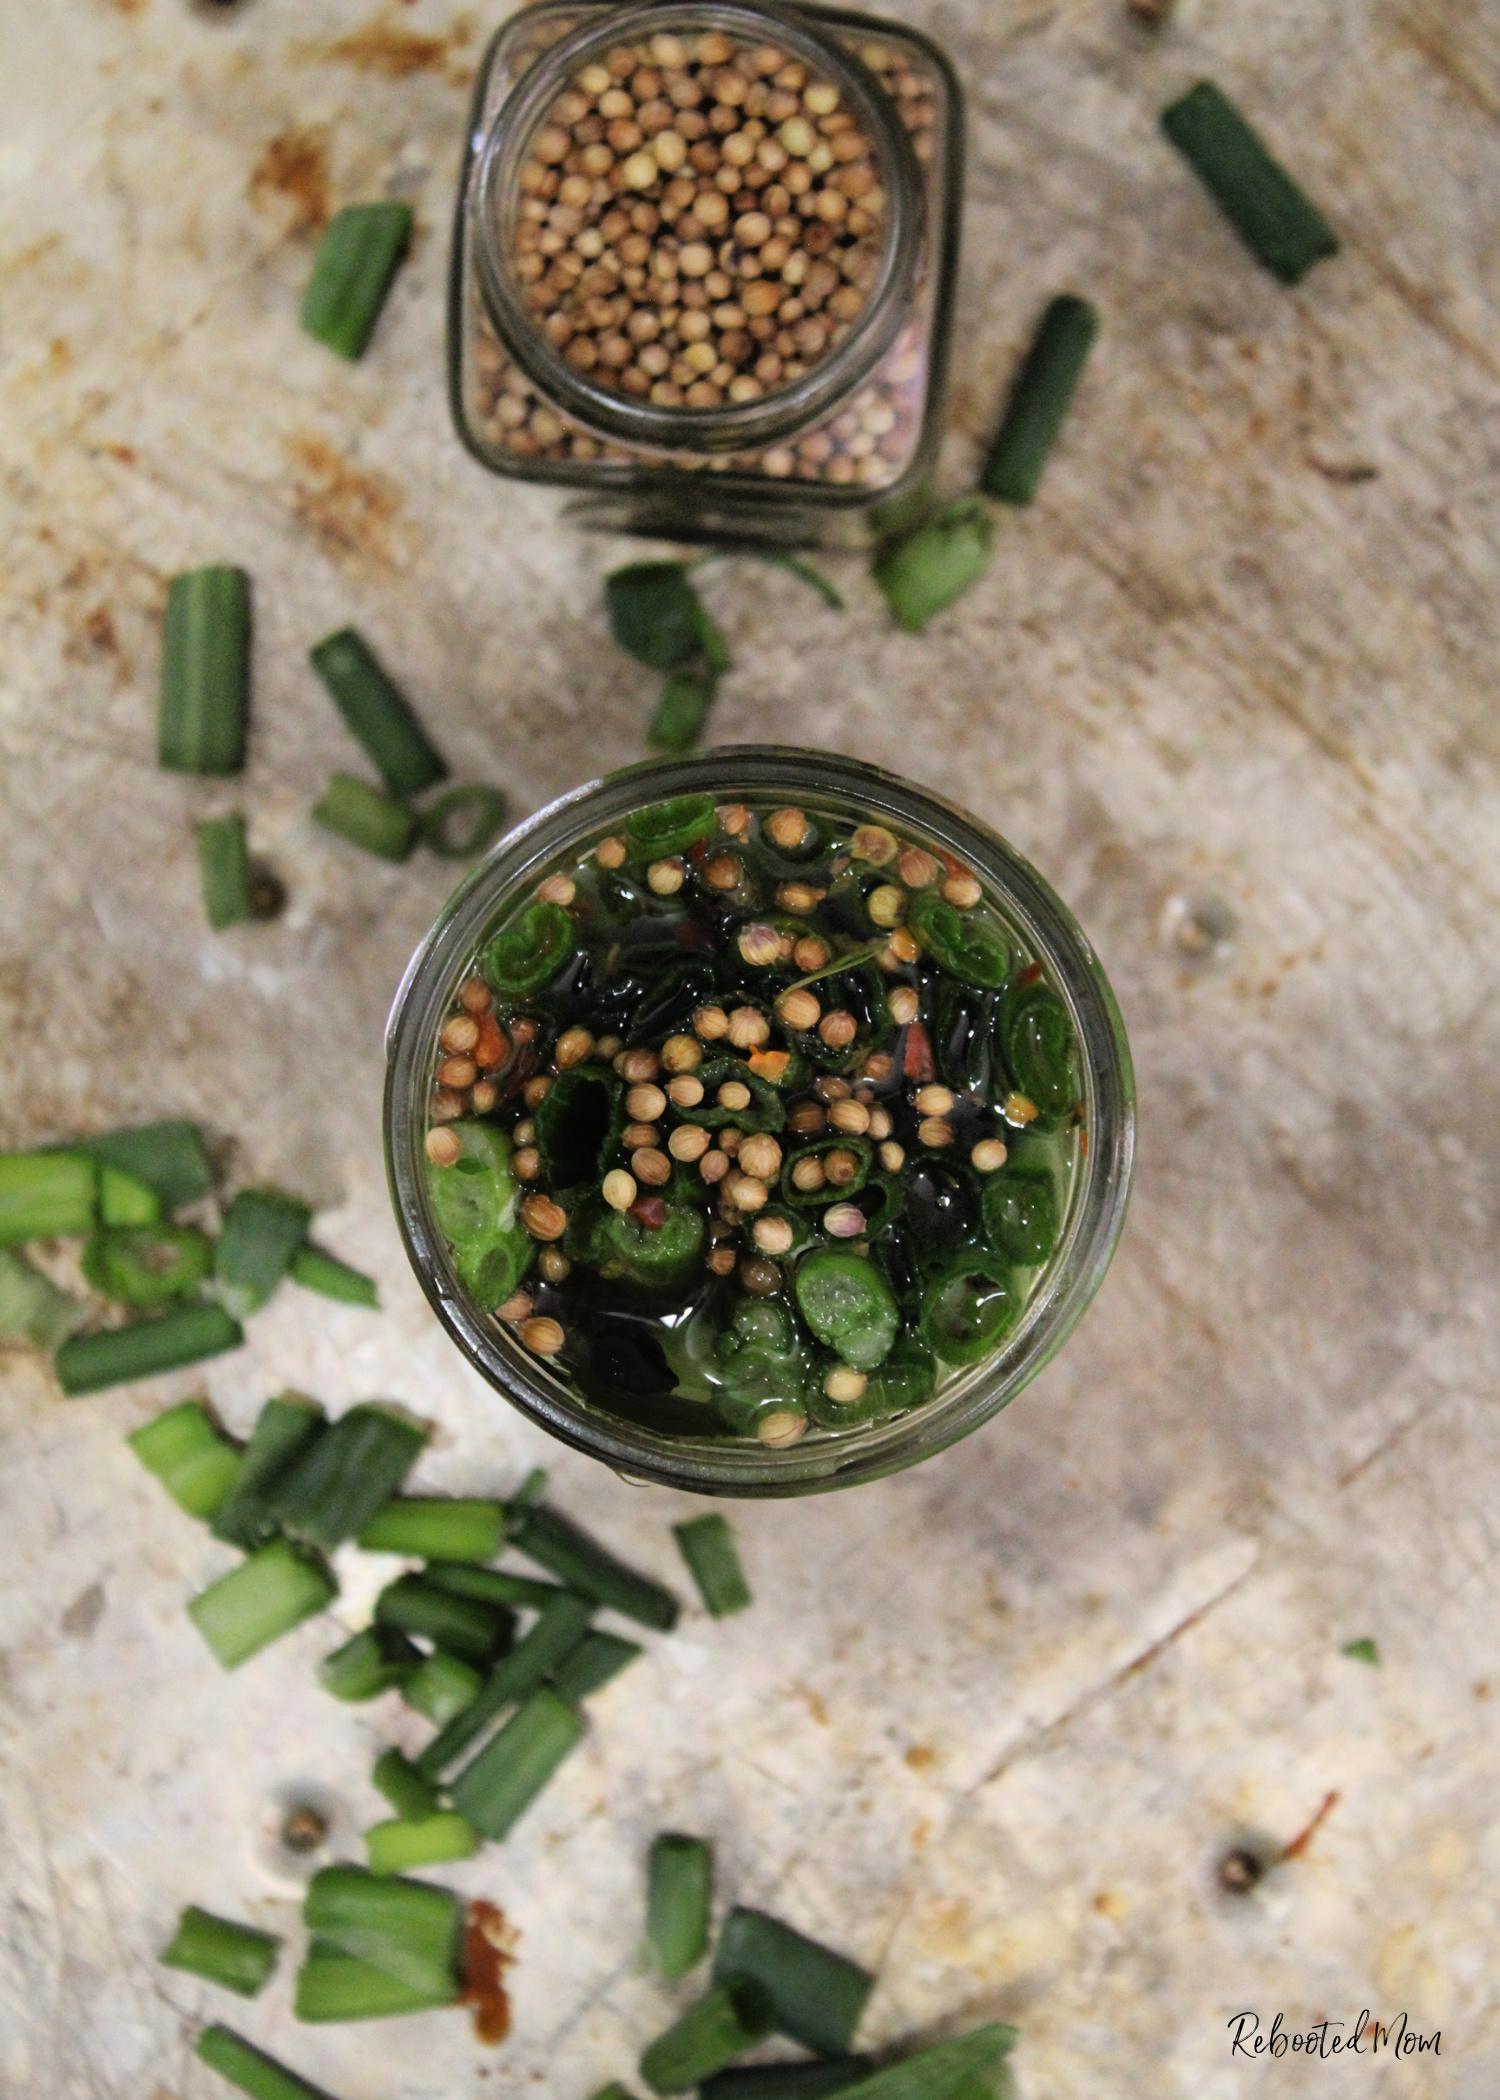 A quick and easy recipe for Quick Pickled Scallions - a sure fire way to transform a bunch of these green beauties into a snack that tastes amazing!